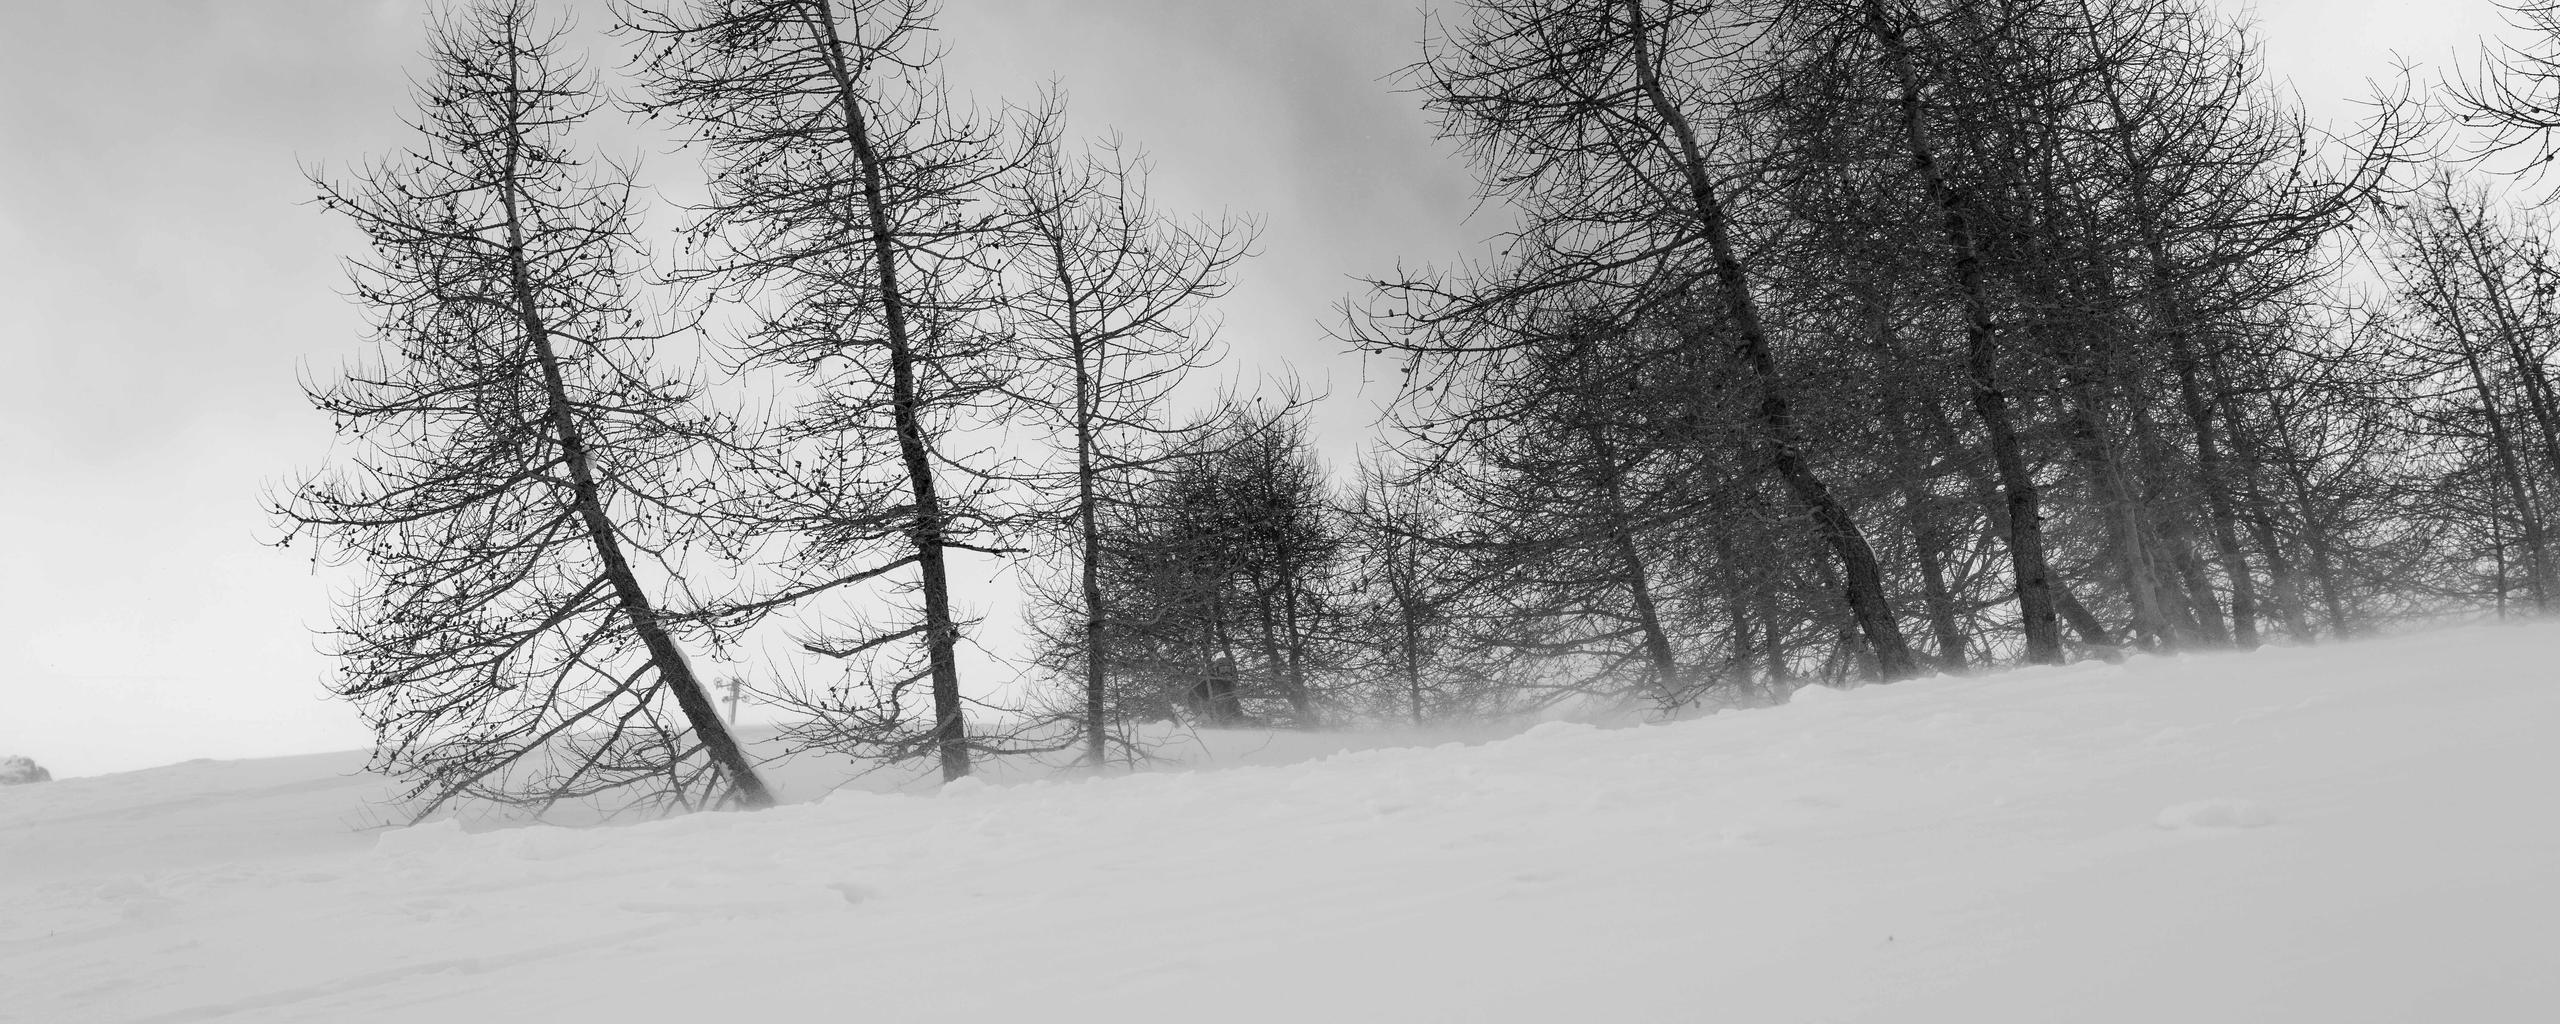 Black and white photo of bare trees in snowy landscape